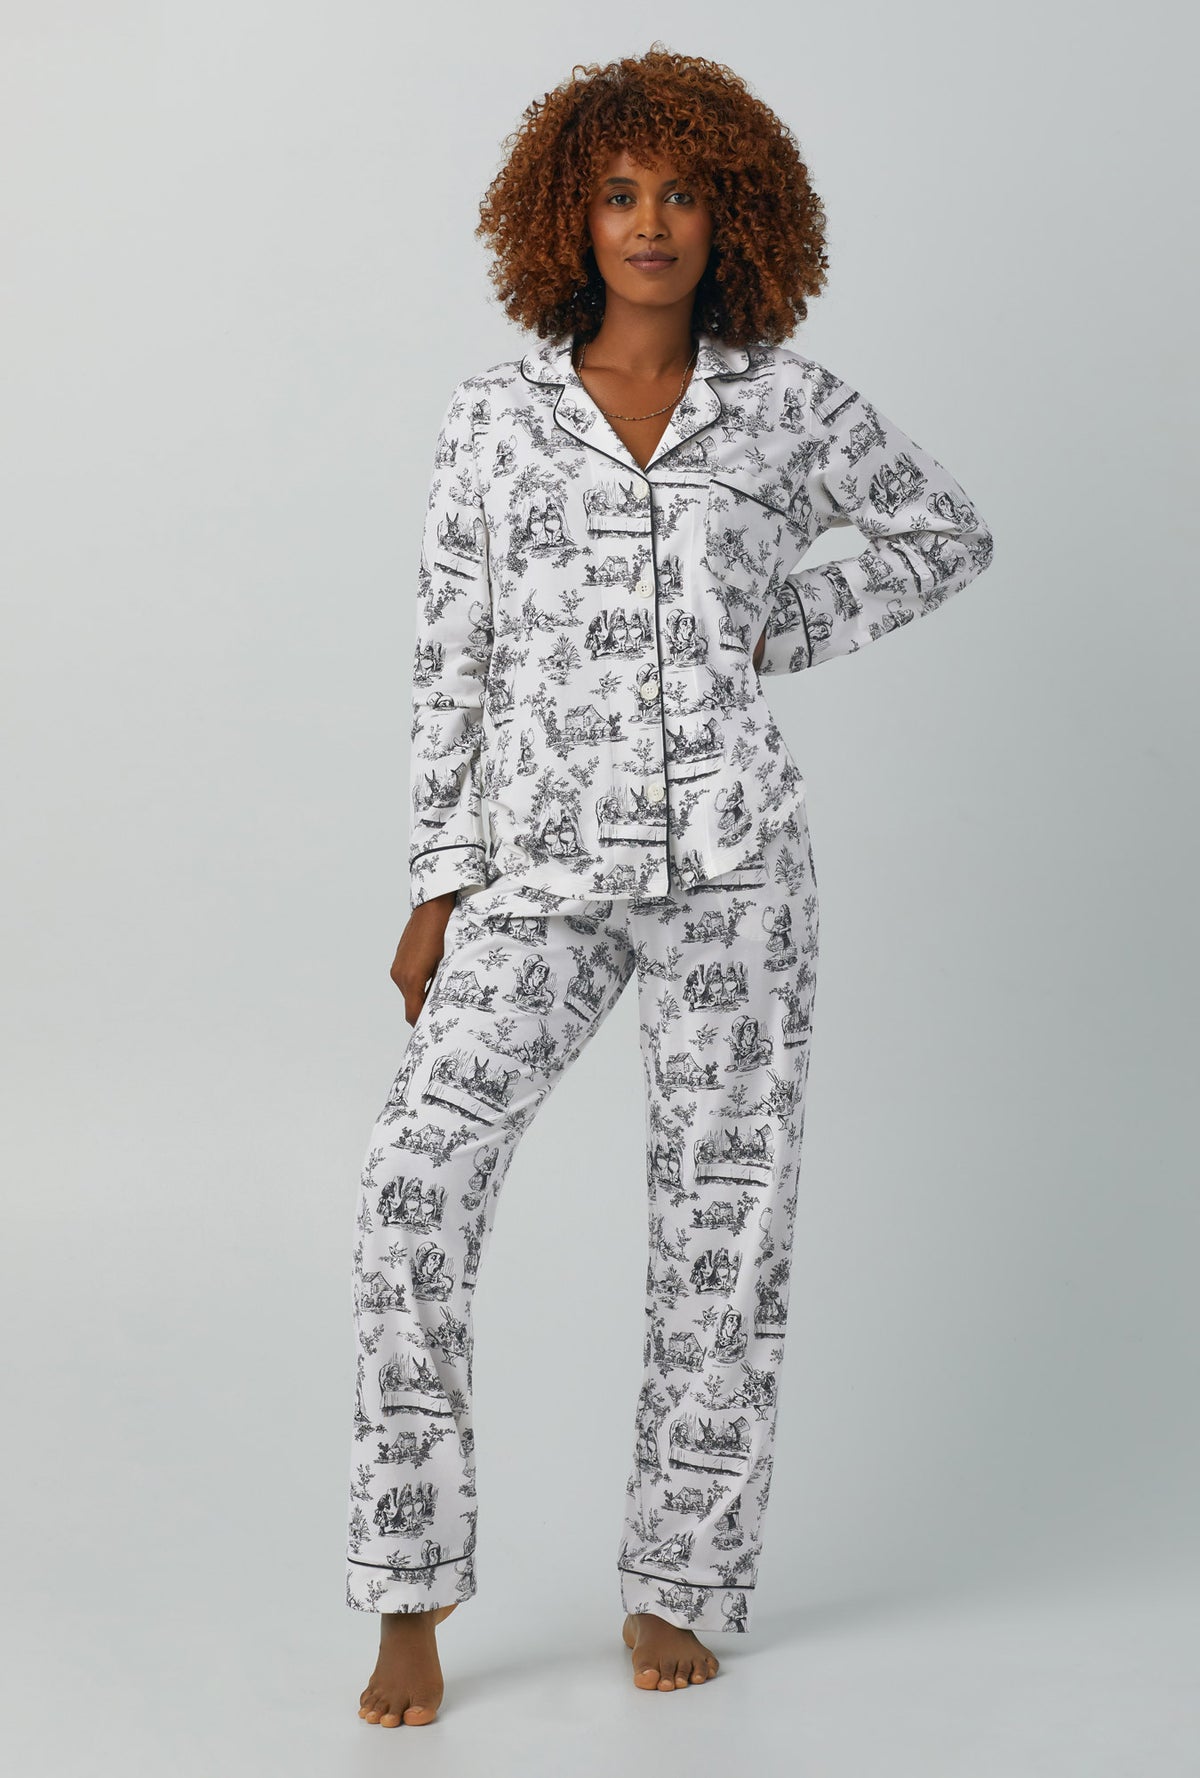 A lady wearing white Long Sleeve Classic Stretch Jersey PJ Set with Adventures in Wonderland print